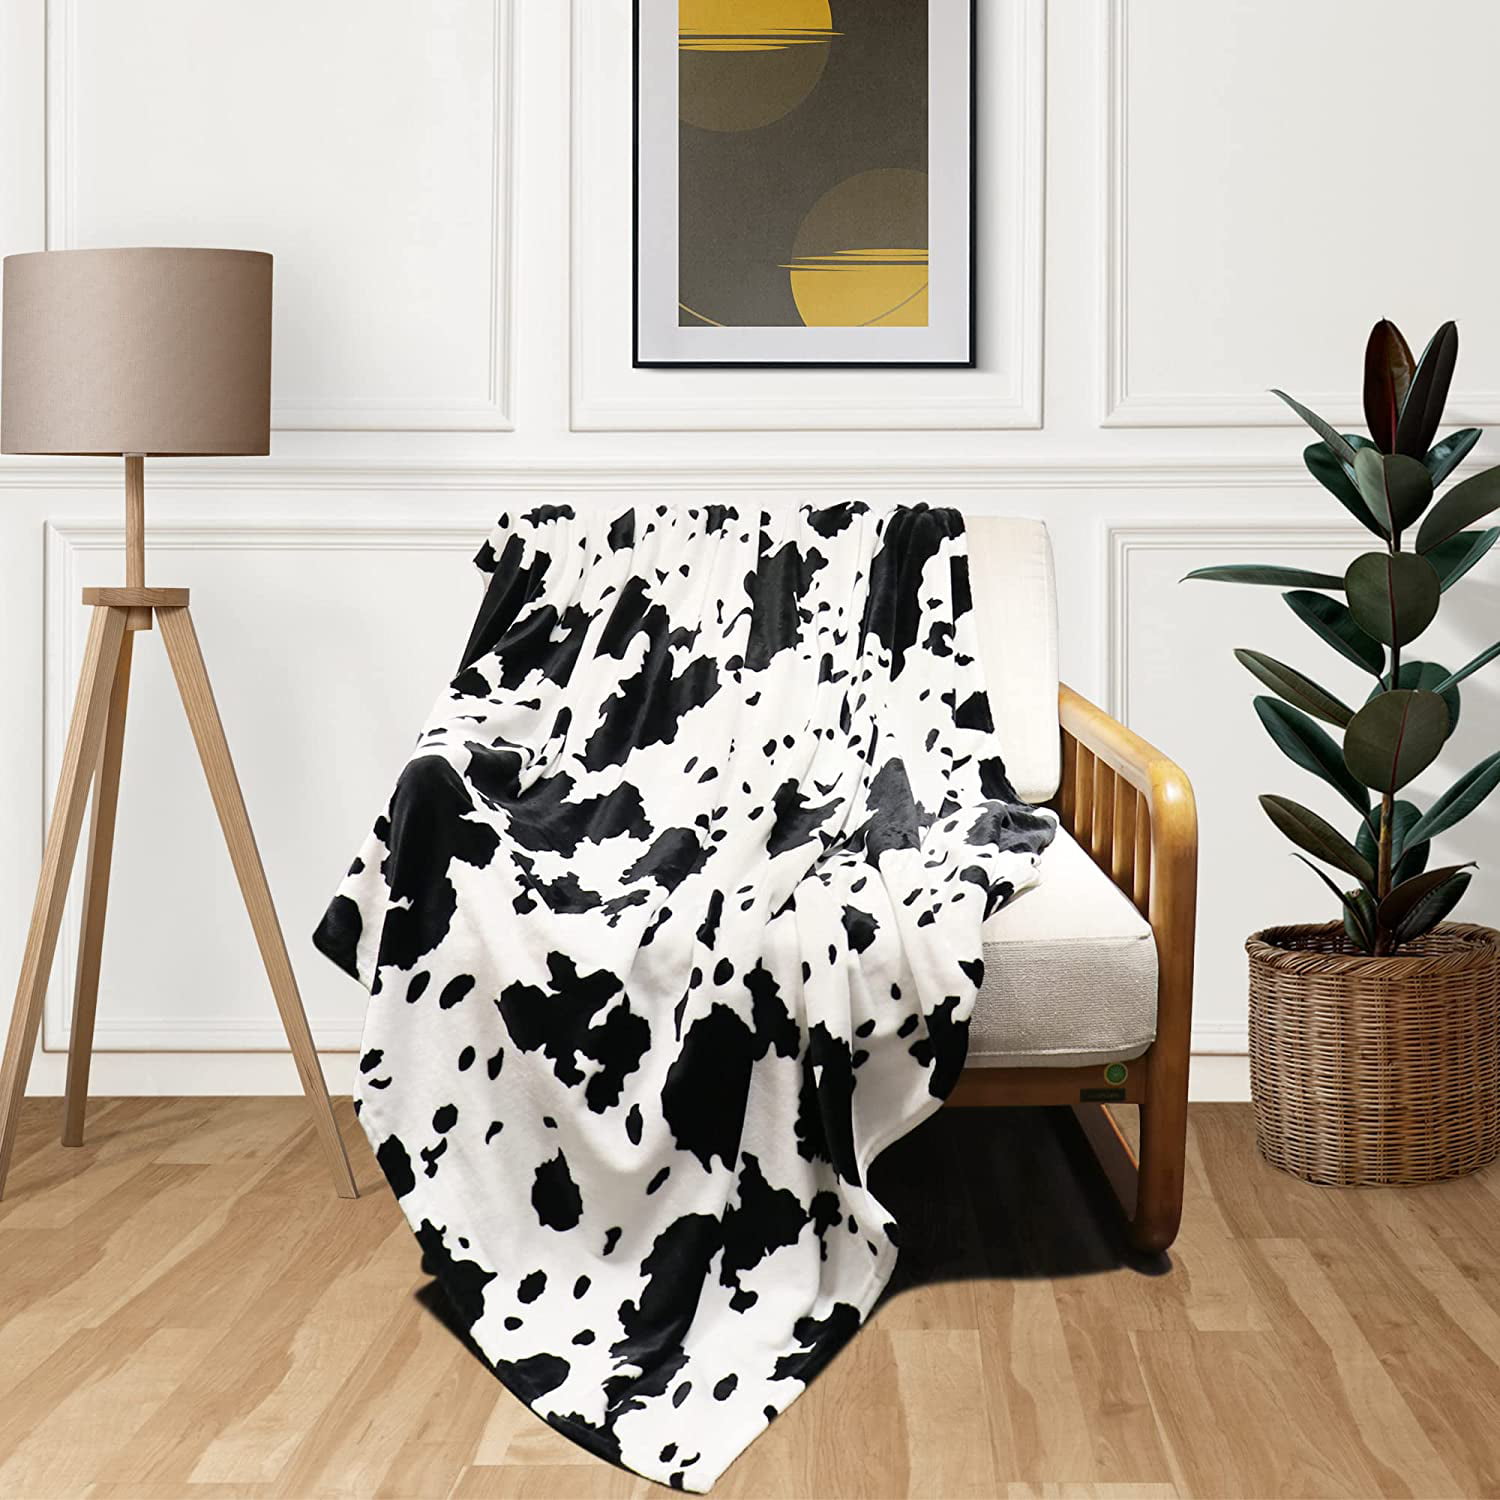 Cow Print Blanket Soft Fleece Flannel Lightweight Cozy Baby Blankets Warm Black and White Cow Throw Blanket Baby Seat Couch Bed Cow Bedding Baby Boys Girls Toddler Infant Newborn 40x50 inch 